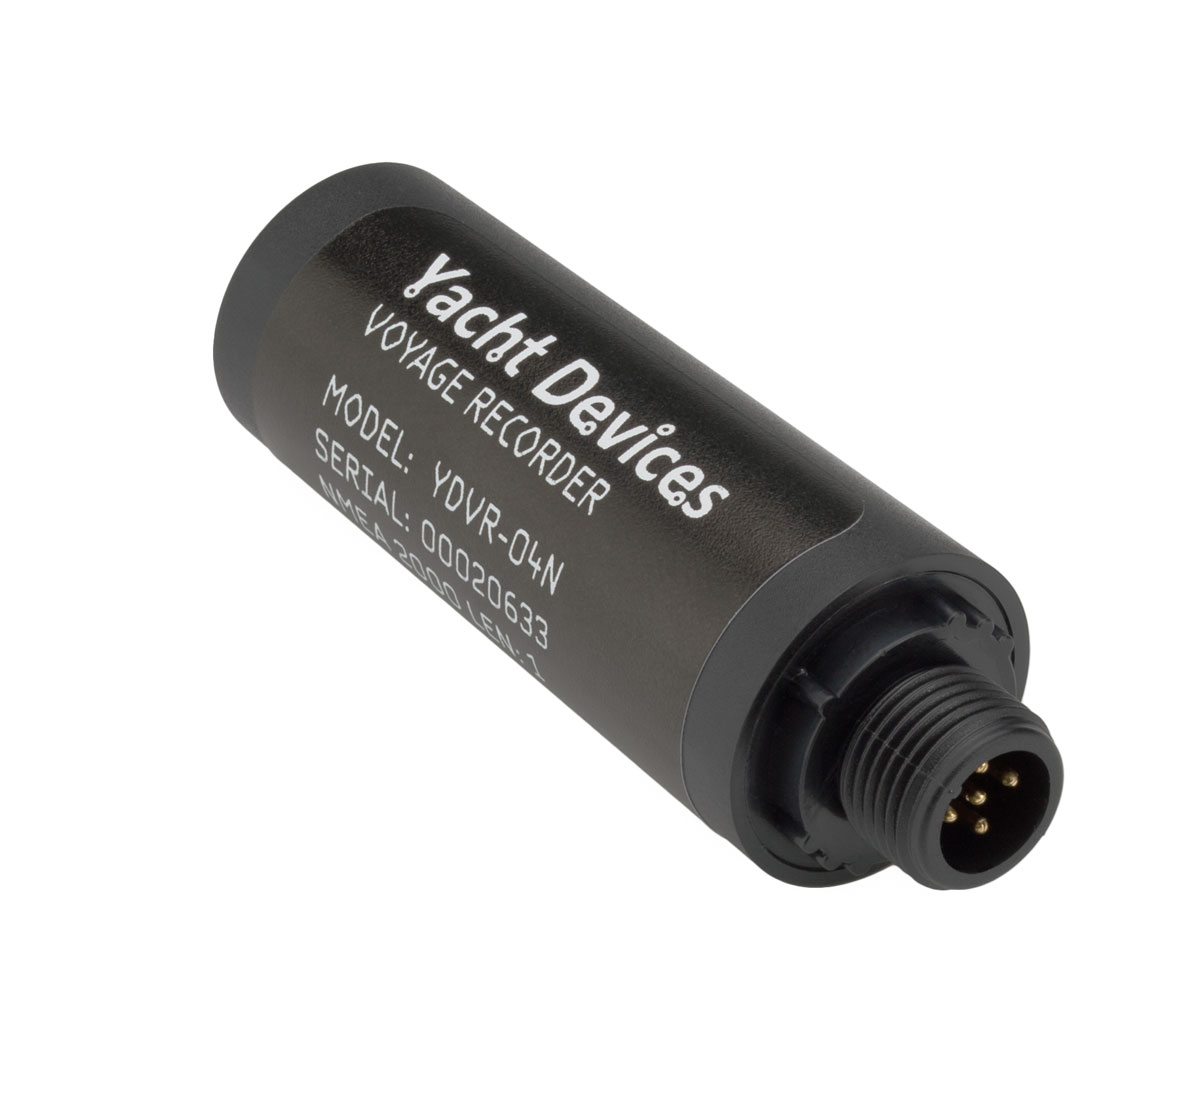 Yacht Devices Voyage Recorder NMEA 2000 YDVR-04N